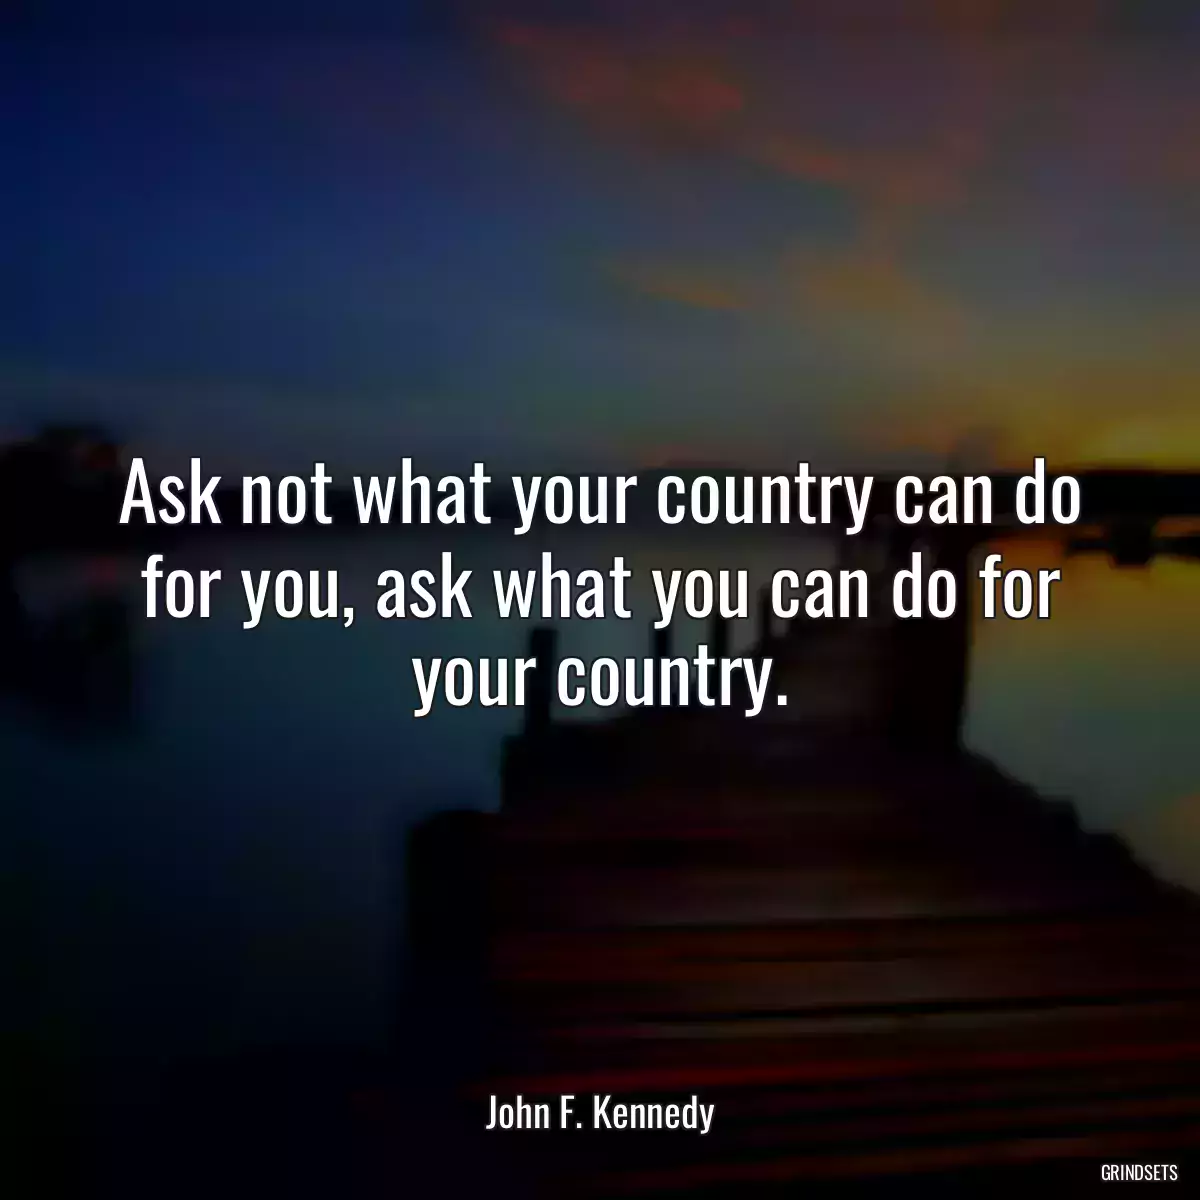 Ask not what your country can do for you, ask what you can do for your country.